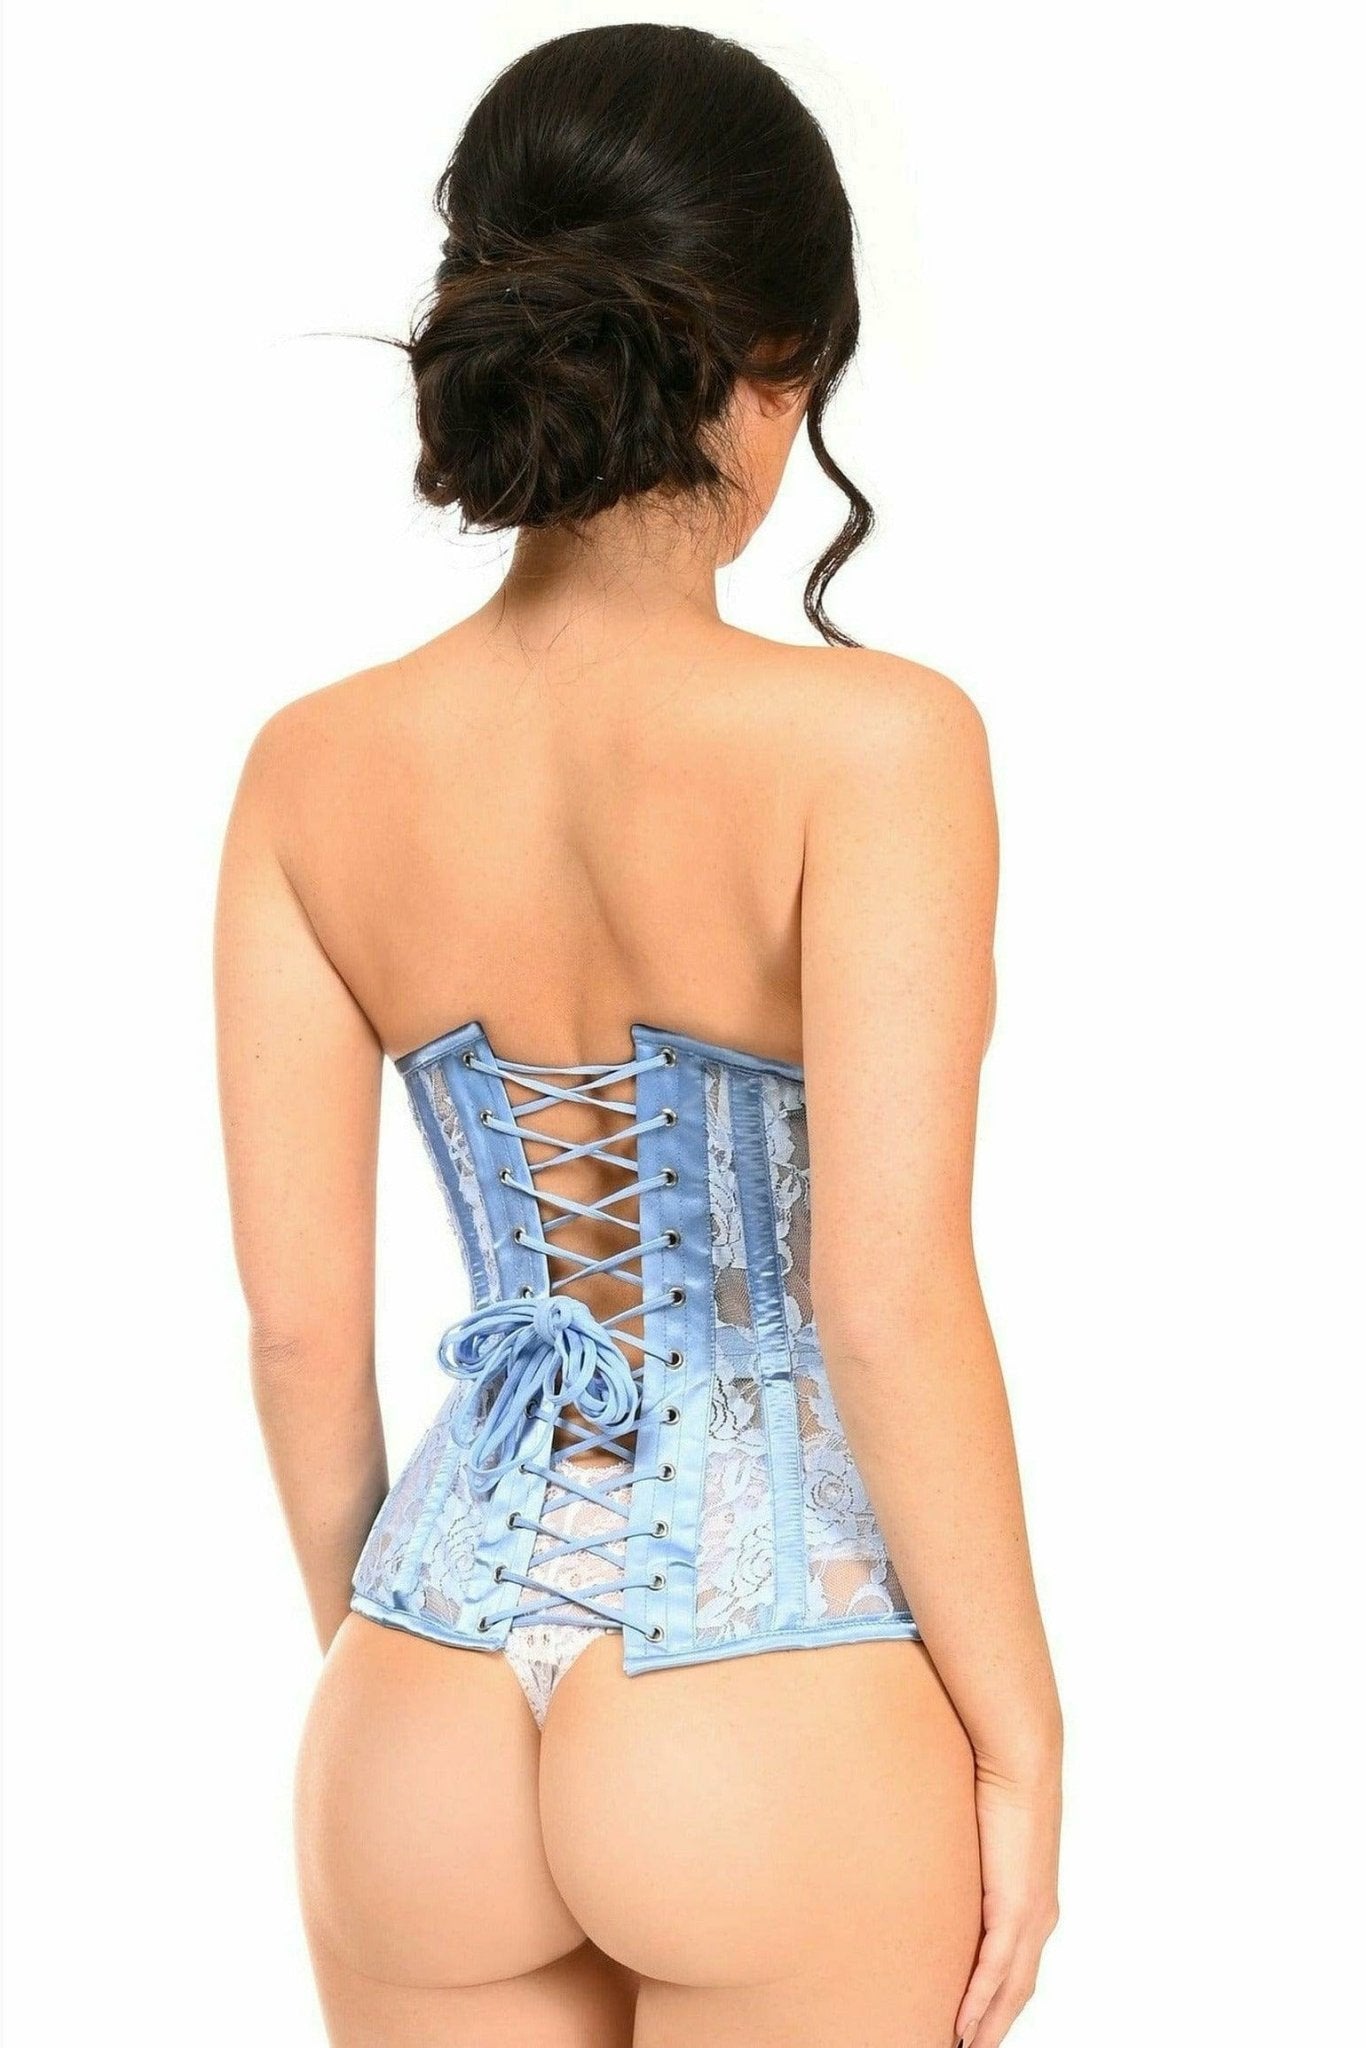 Sexy Light Blue Sheer Lace Underwire Open Cup Underbust Corset Musotica.com